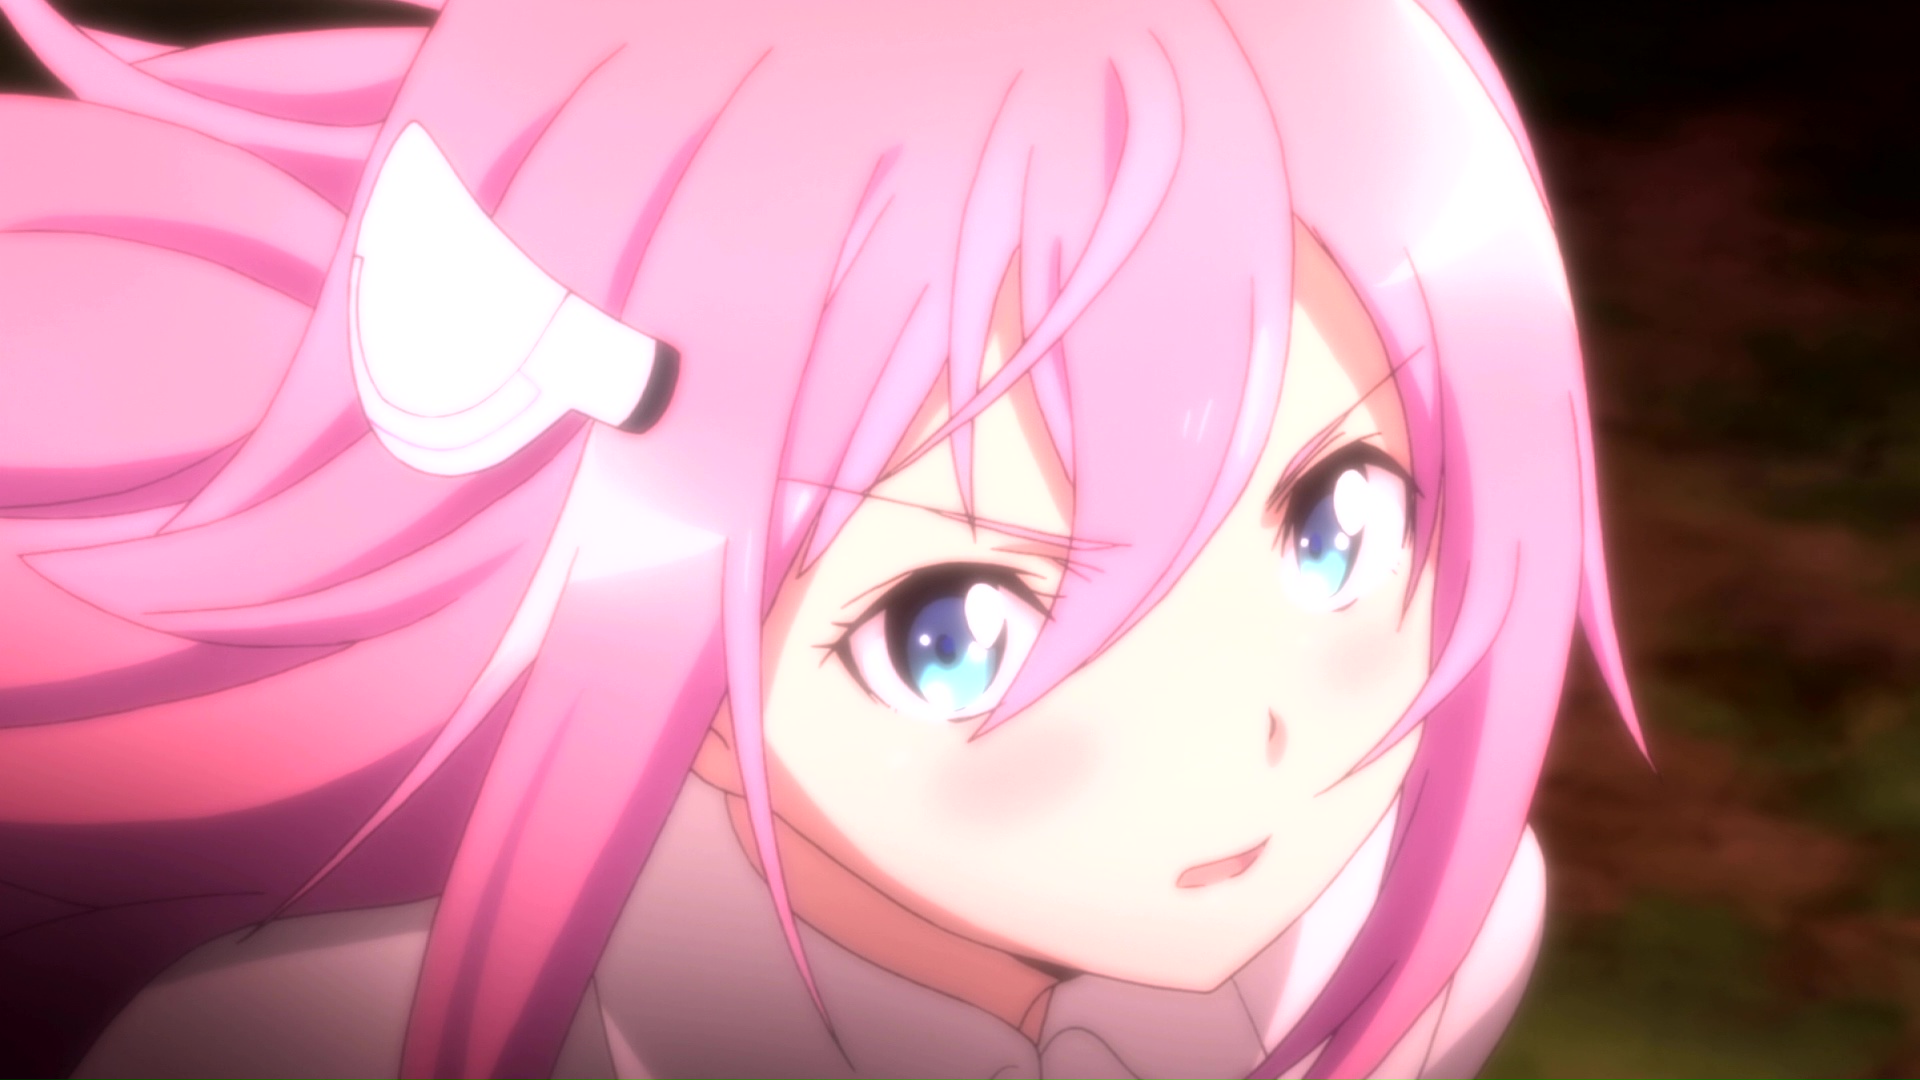 The Asterisk War A Holiday for Two - Watch on Crunchyroll